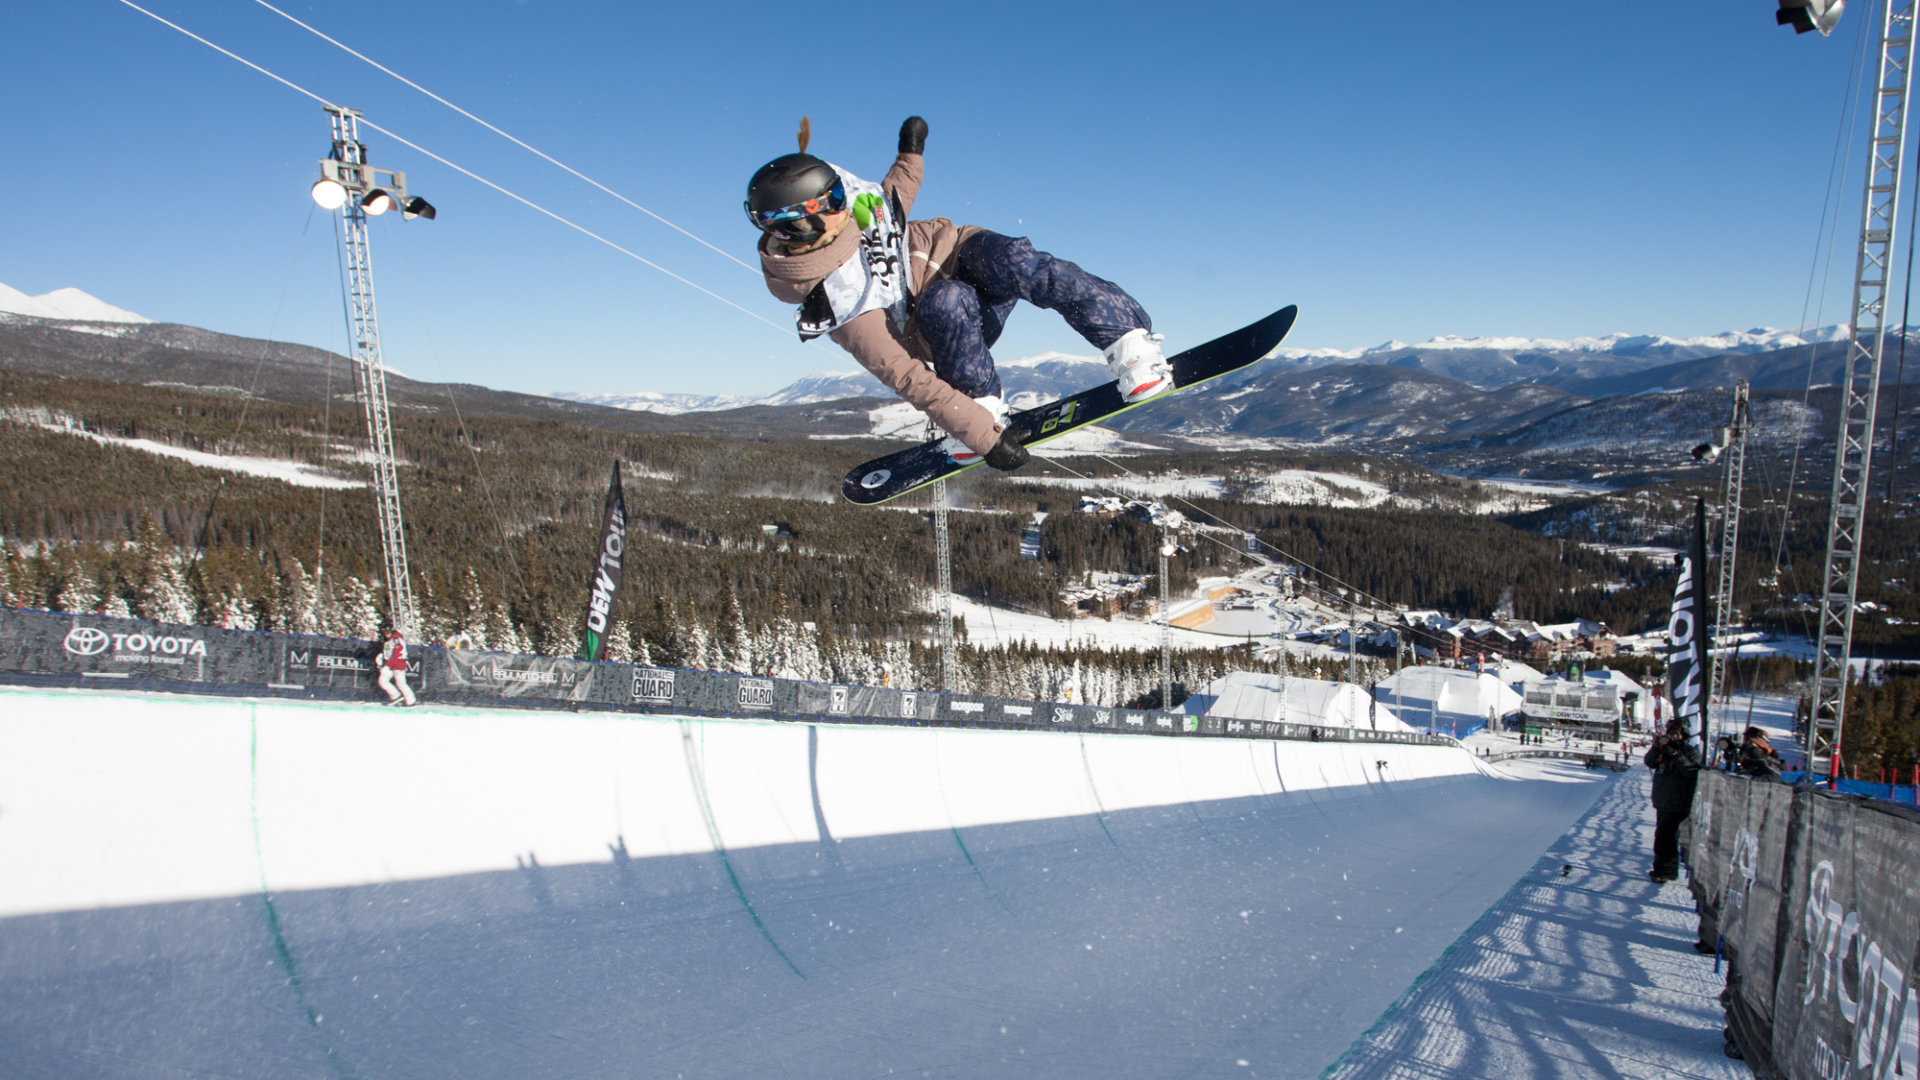 Silver medal in the discipline of snowboarding Torah Bright at the Olympic Games in Sochi